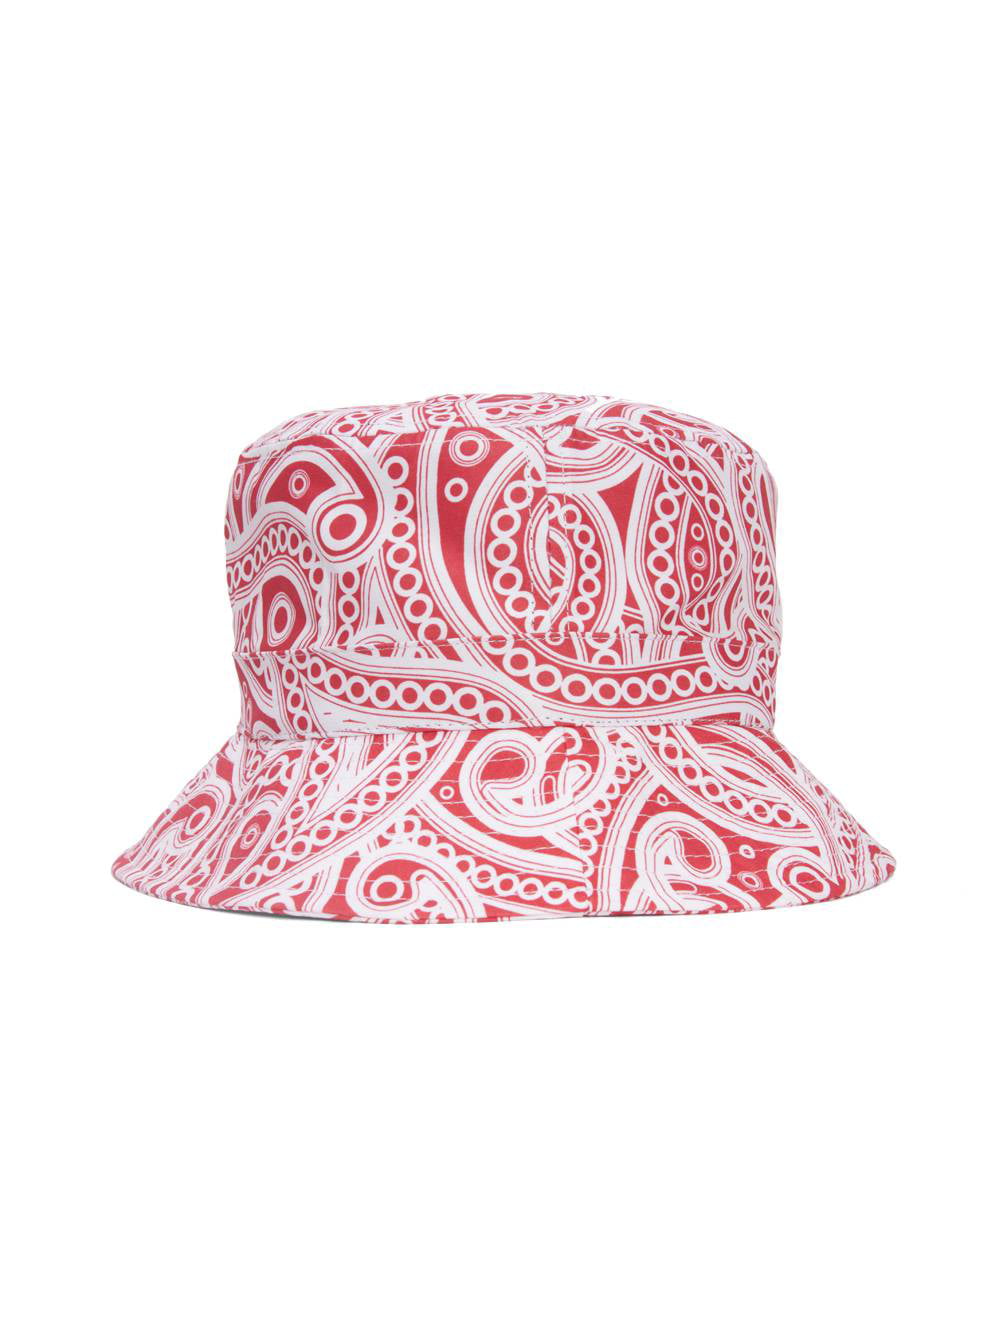 TopHeadwear Sized Bucket Hats - Cotton - White - Large/X-Large